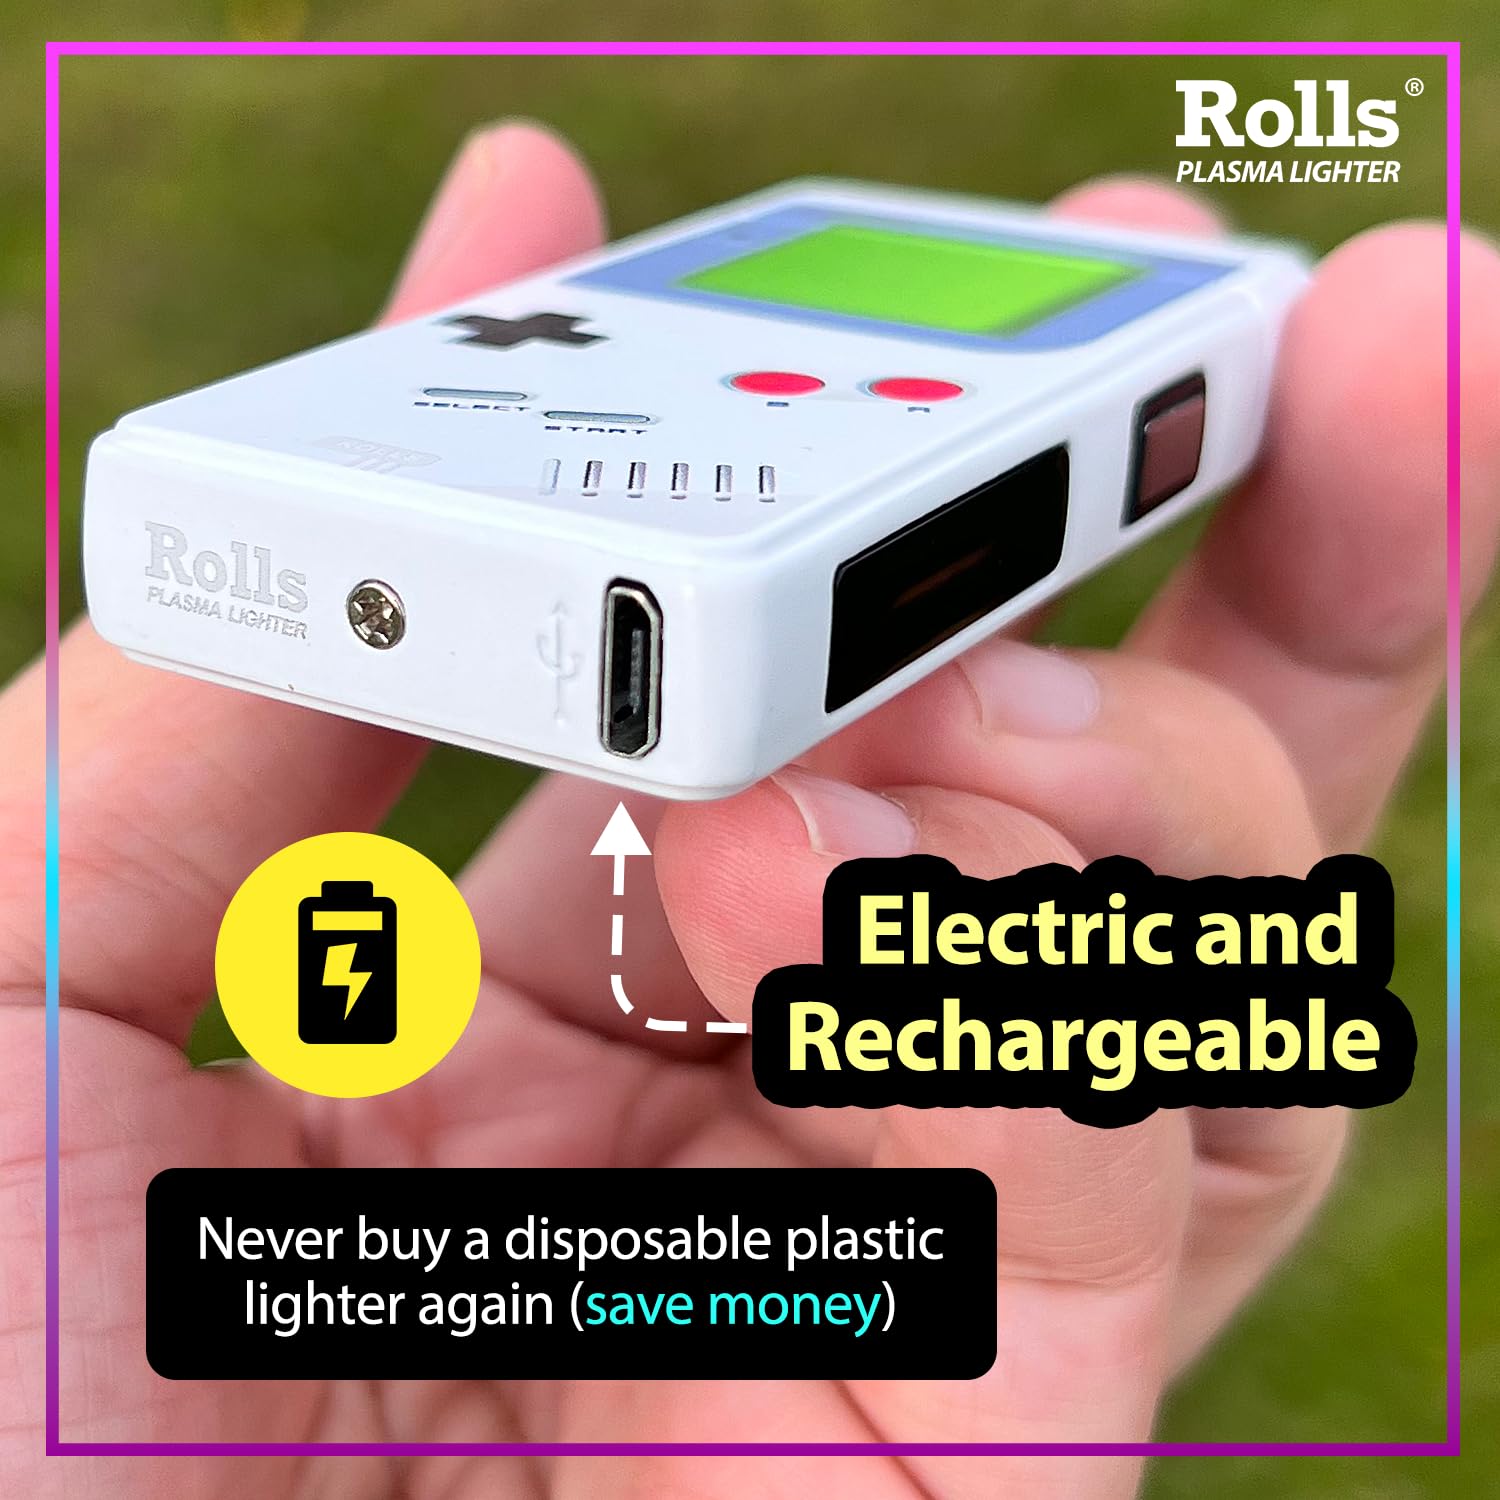 Rolls Electric Lighter - USB Rechargeable Retro Gamer Lighter - Cool Lighters - Windproof Electronic Arc Lighter - Candle Lighter - Unique Gadgets - Gift for Men Women - by Rolls Plasma Lighter (Grey) - amzGamess